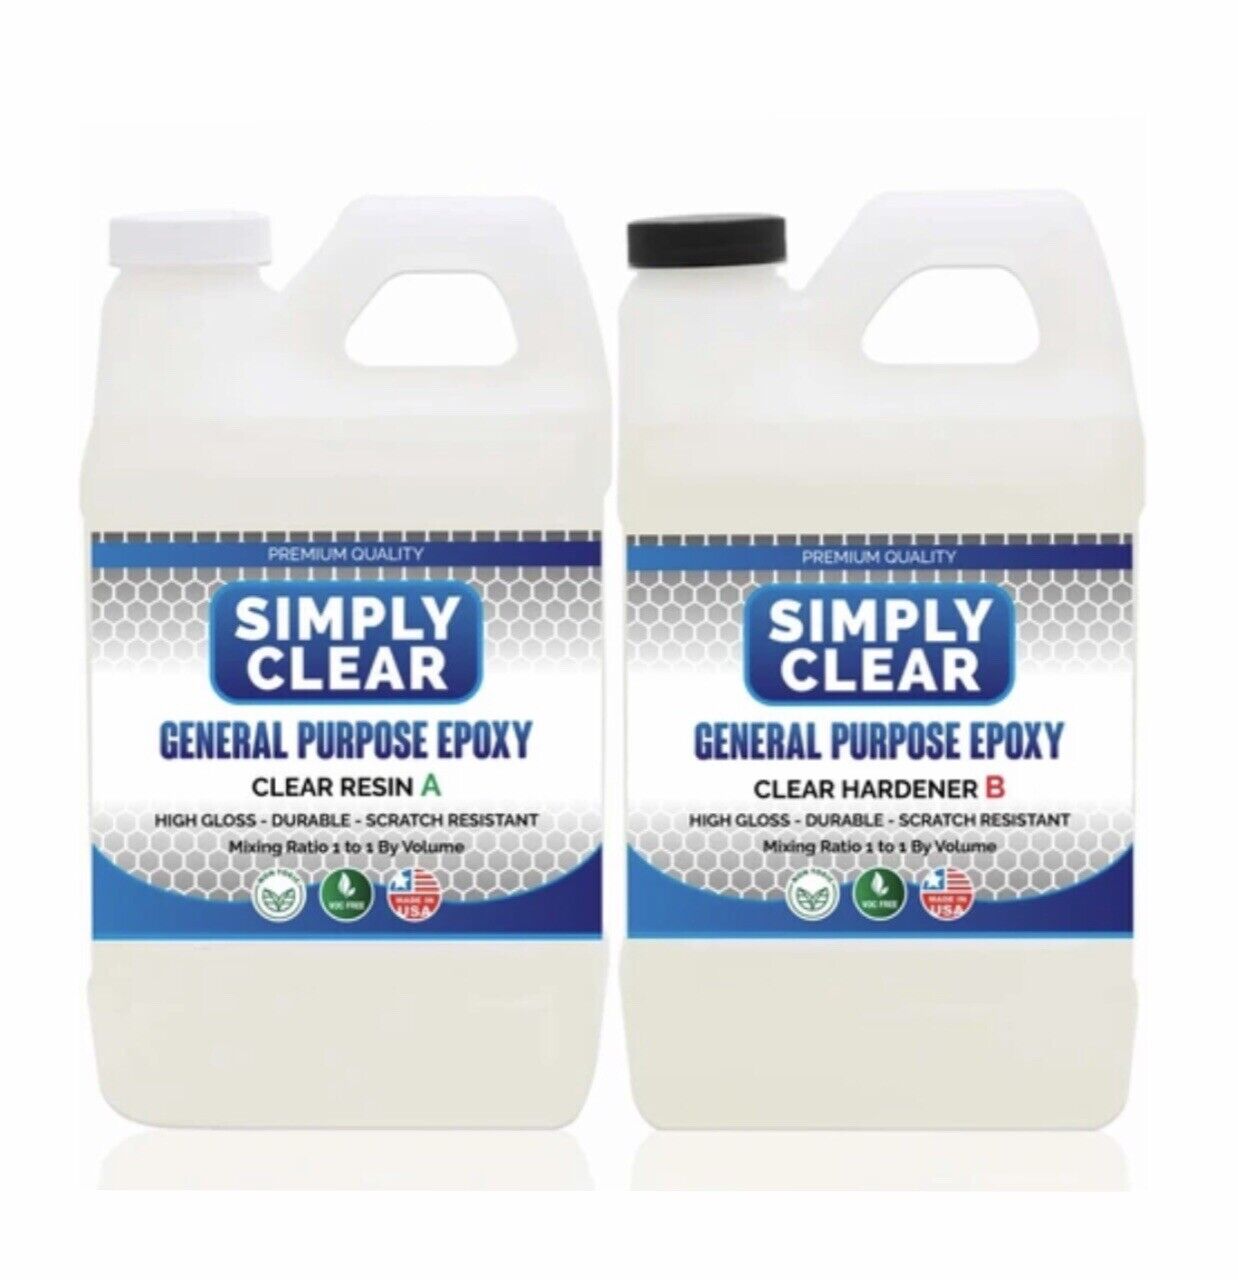 Crystal Clear Epoxy - 1 Gallon Combined - table tops, Small CASTINGS and CRAFTS